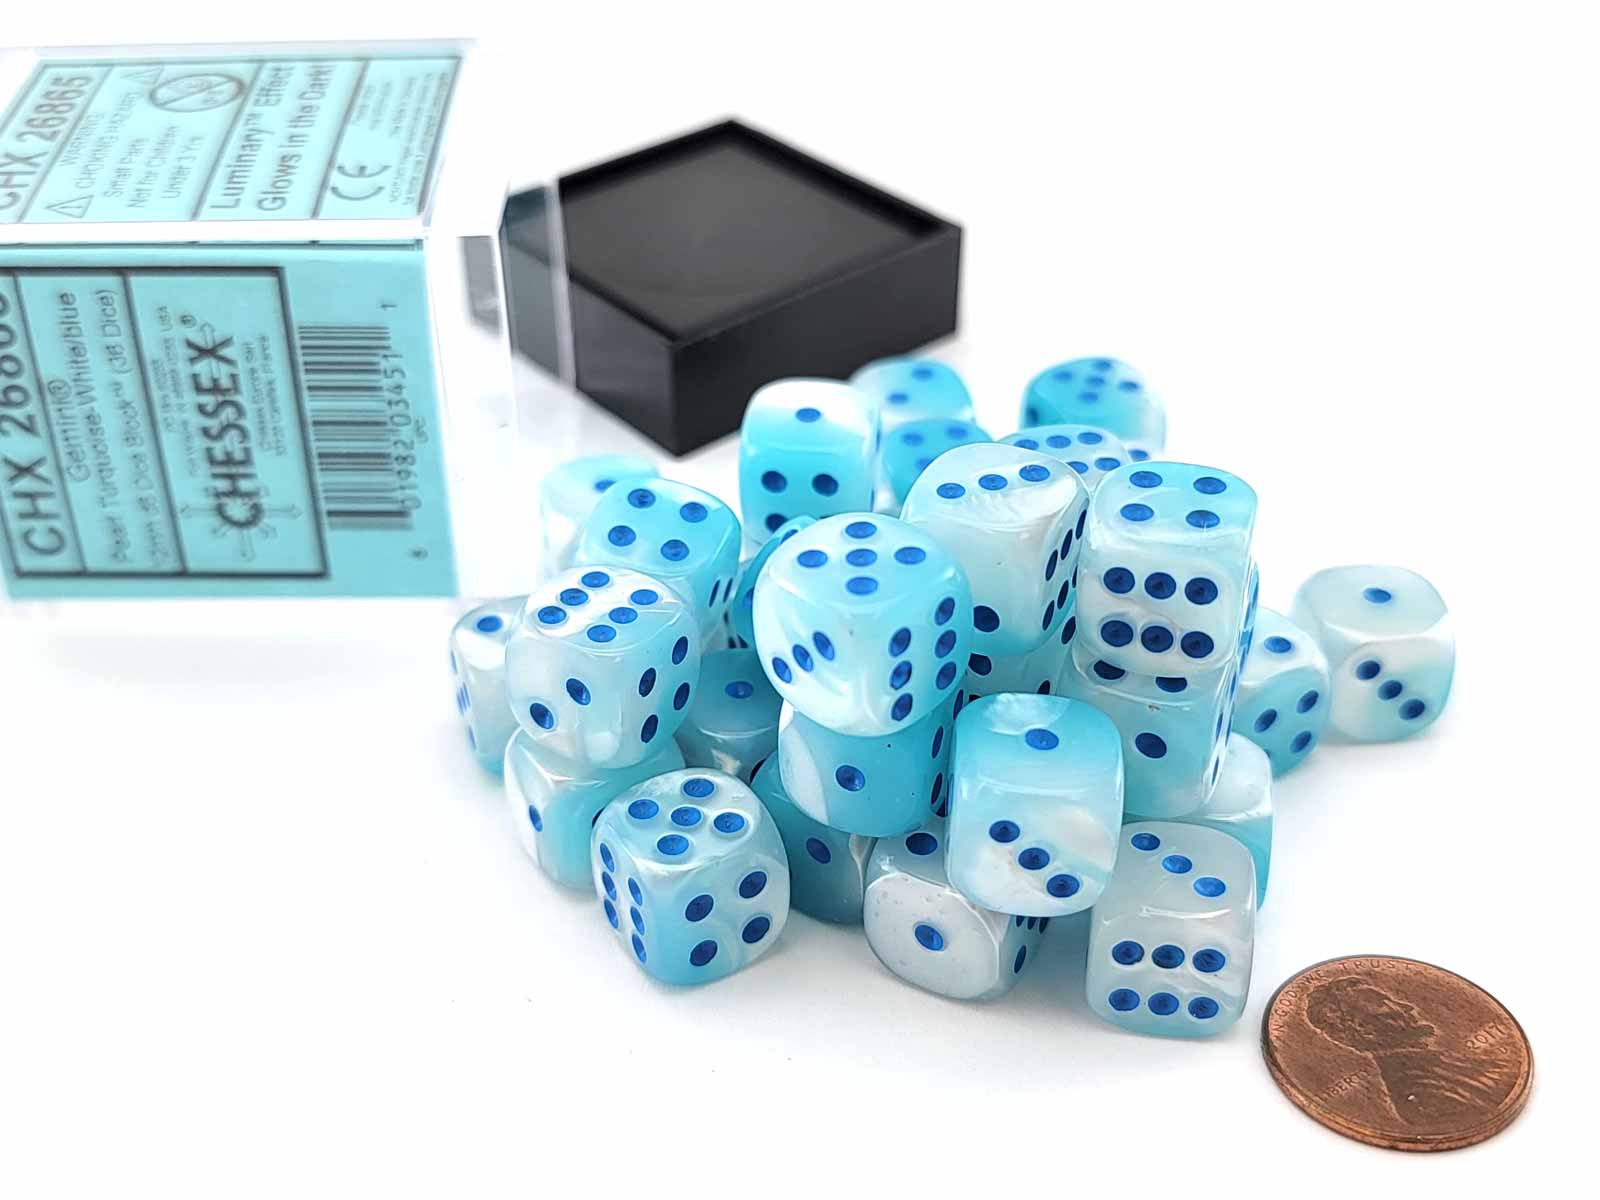 Block of 12 6-Sided 16mm Dice - Chessex Pearl Turquoise & White with Blue Numerals Luminary Glows!